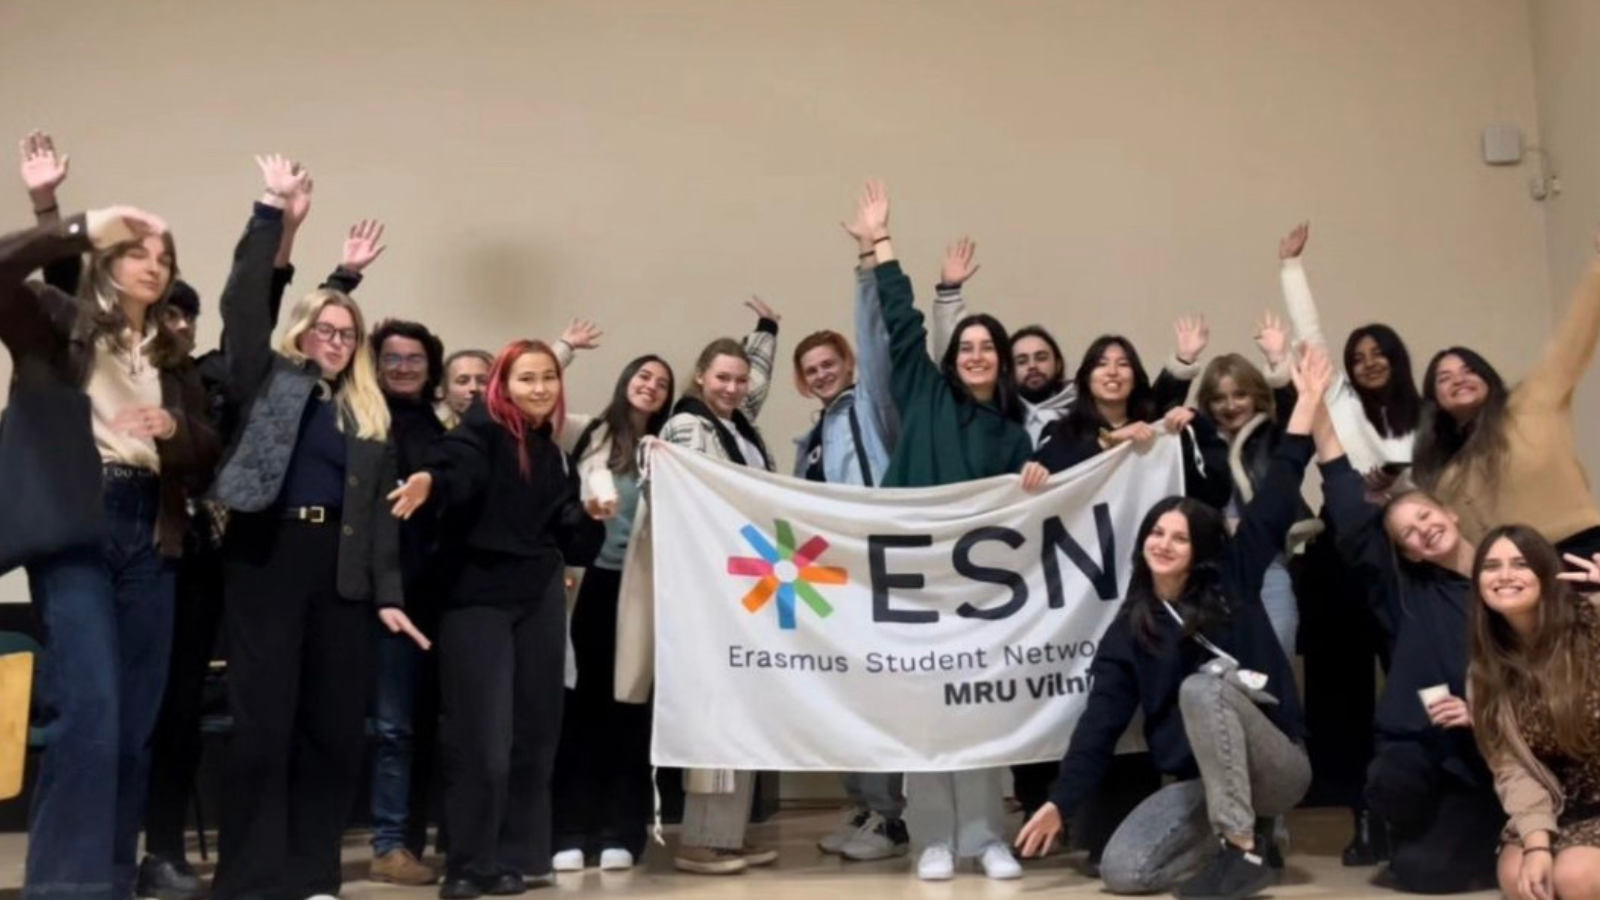 A group picture of young people holding an ESN flag.